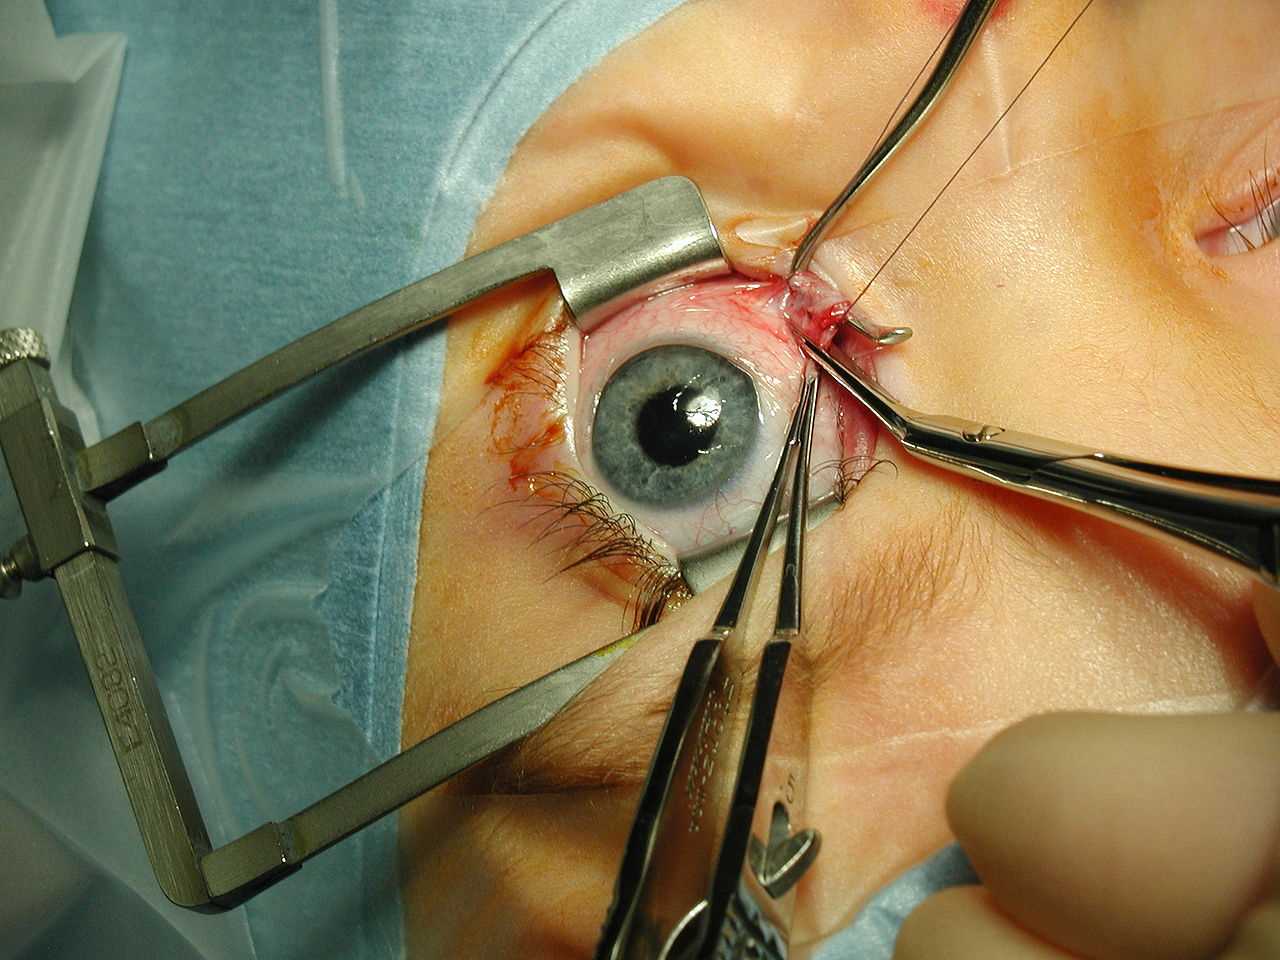  Strabismus surgery—medial rectus muscle being disinserted following pre-placement of polyglactin 910 sutures. A Castroviejo locking forceps is grasping the superior pole of the muscle, while a Manson-Aebli scissors does the cutting. The eyelids are being held by a Cook speculum.